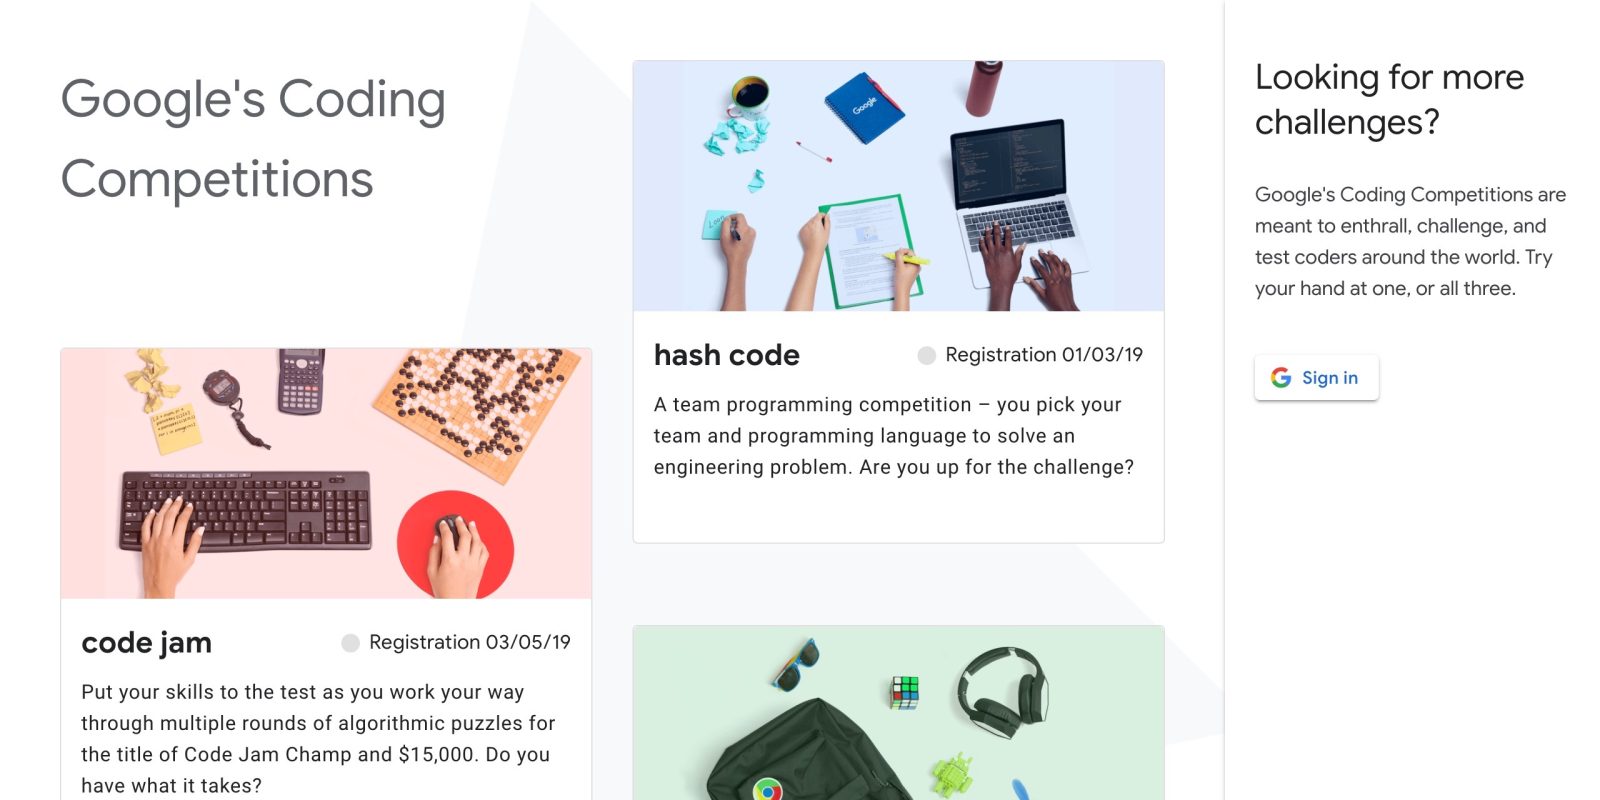 Google Coding Competitions